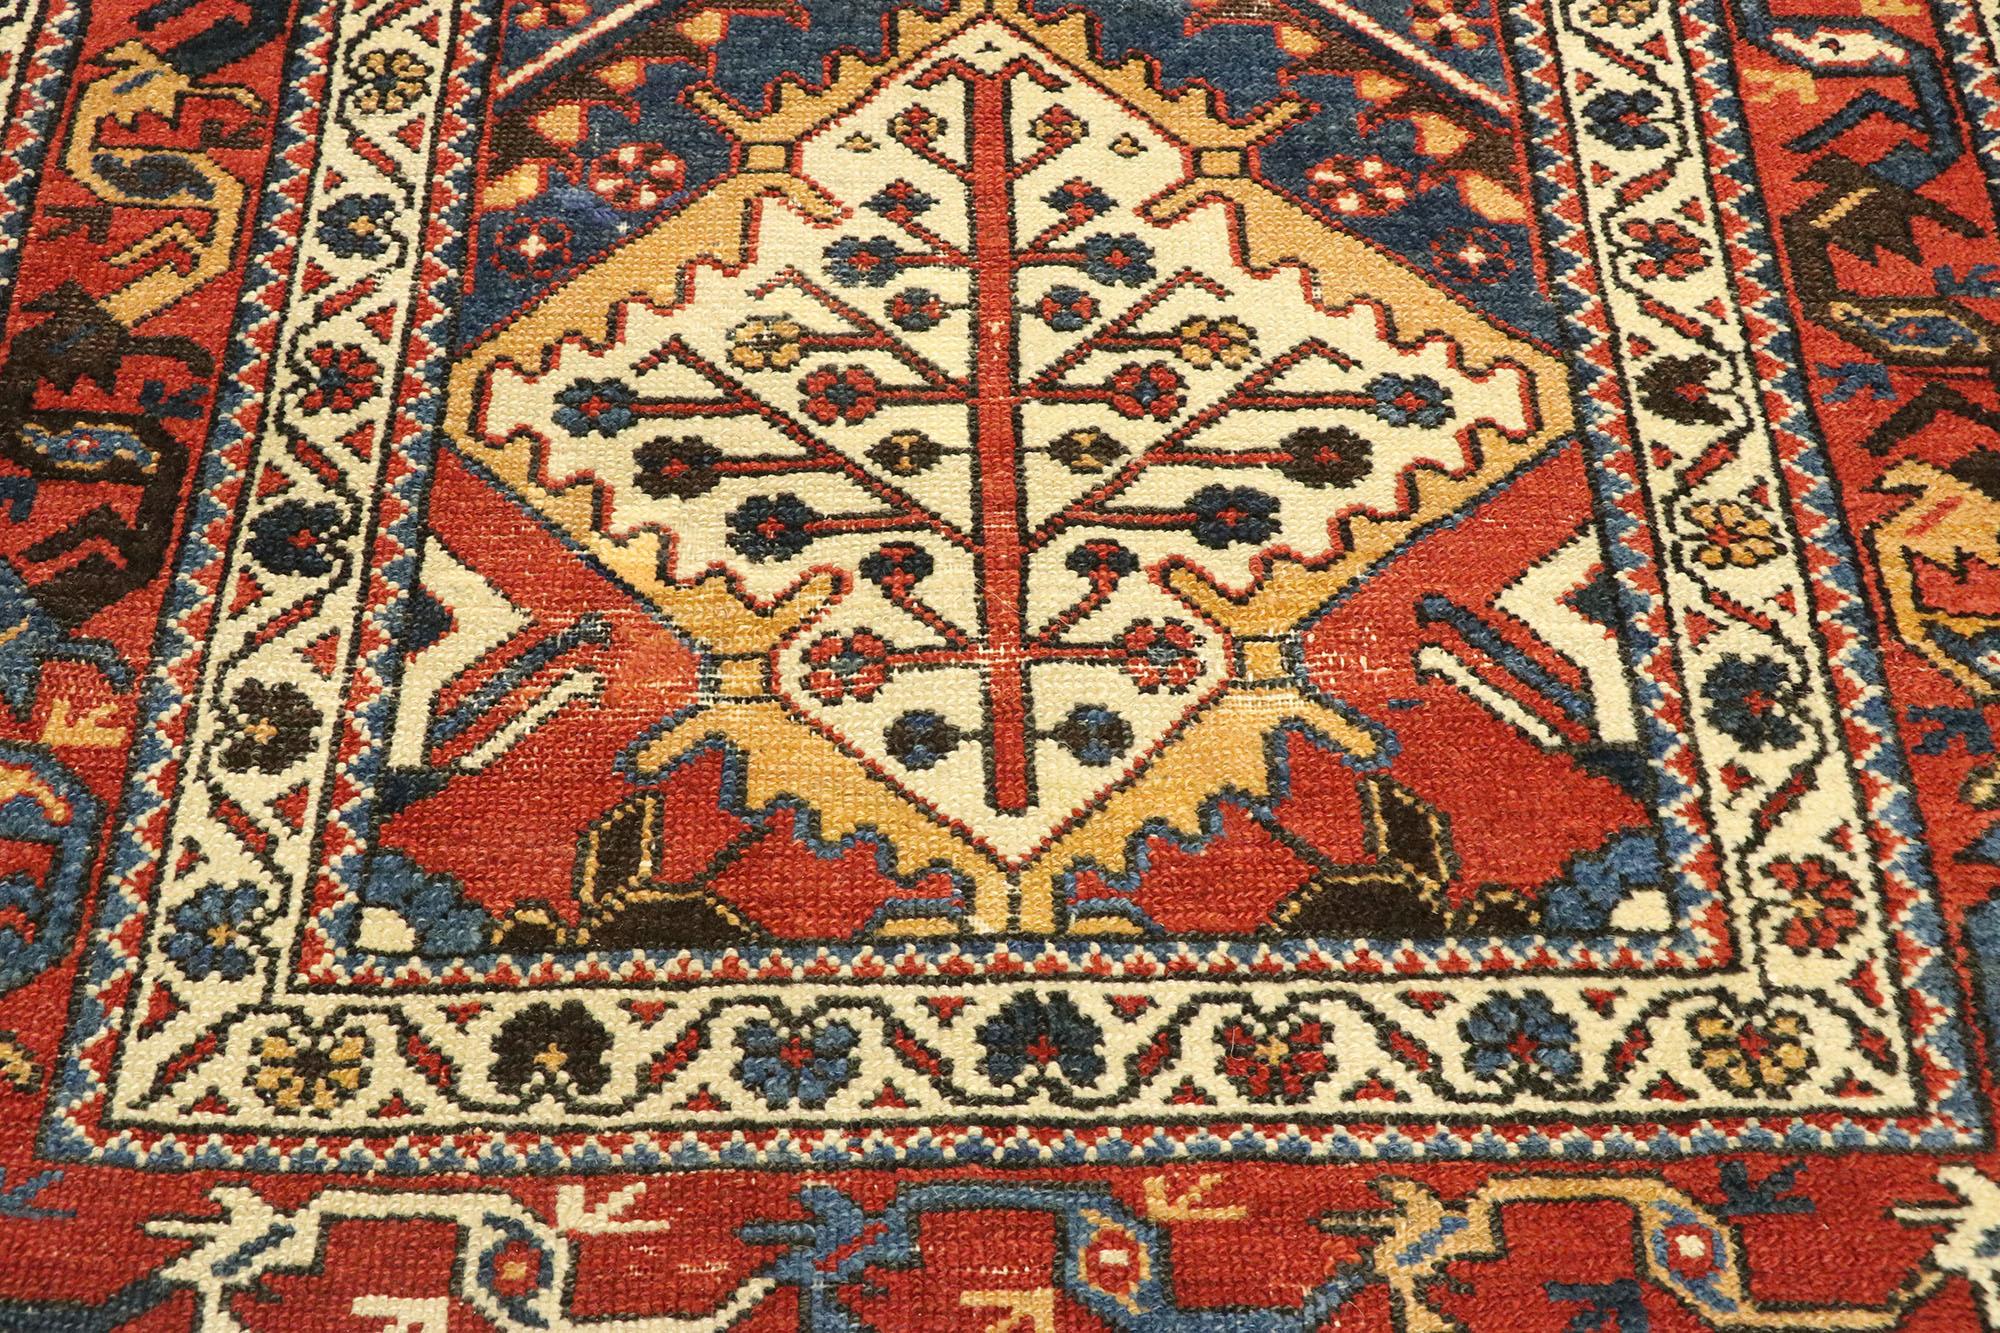 Hand-Knotted Antique Persian Bakhtiari Runner with Modern Rustic Pacific Northwest Style